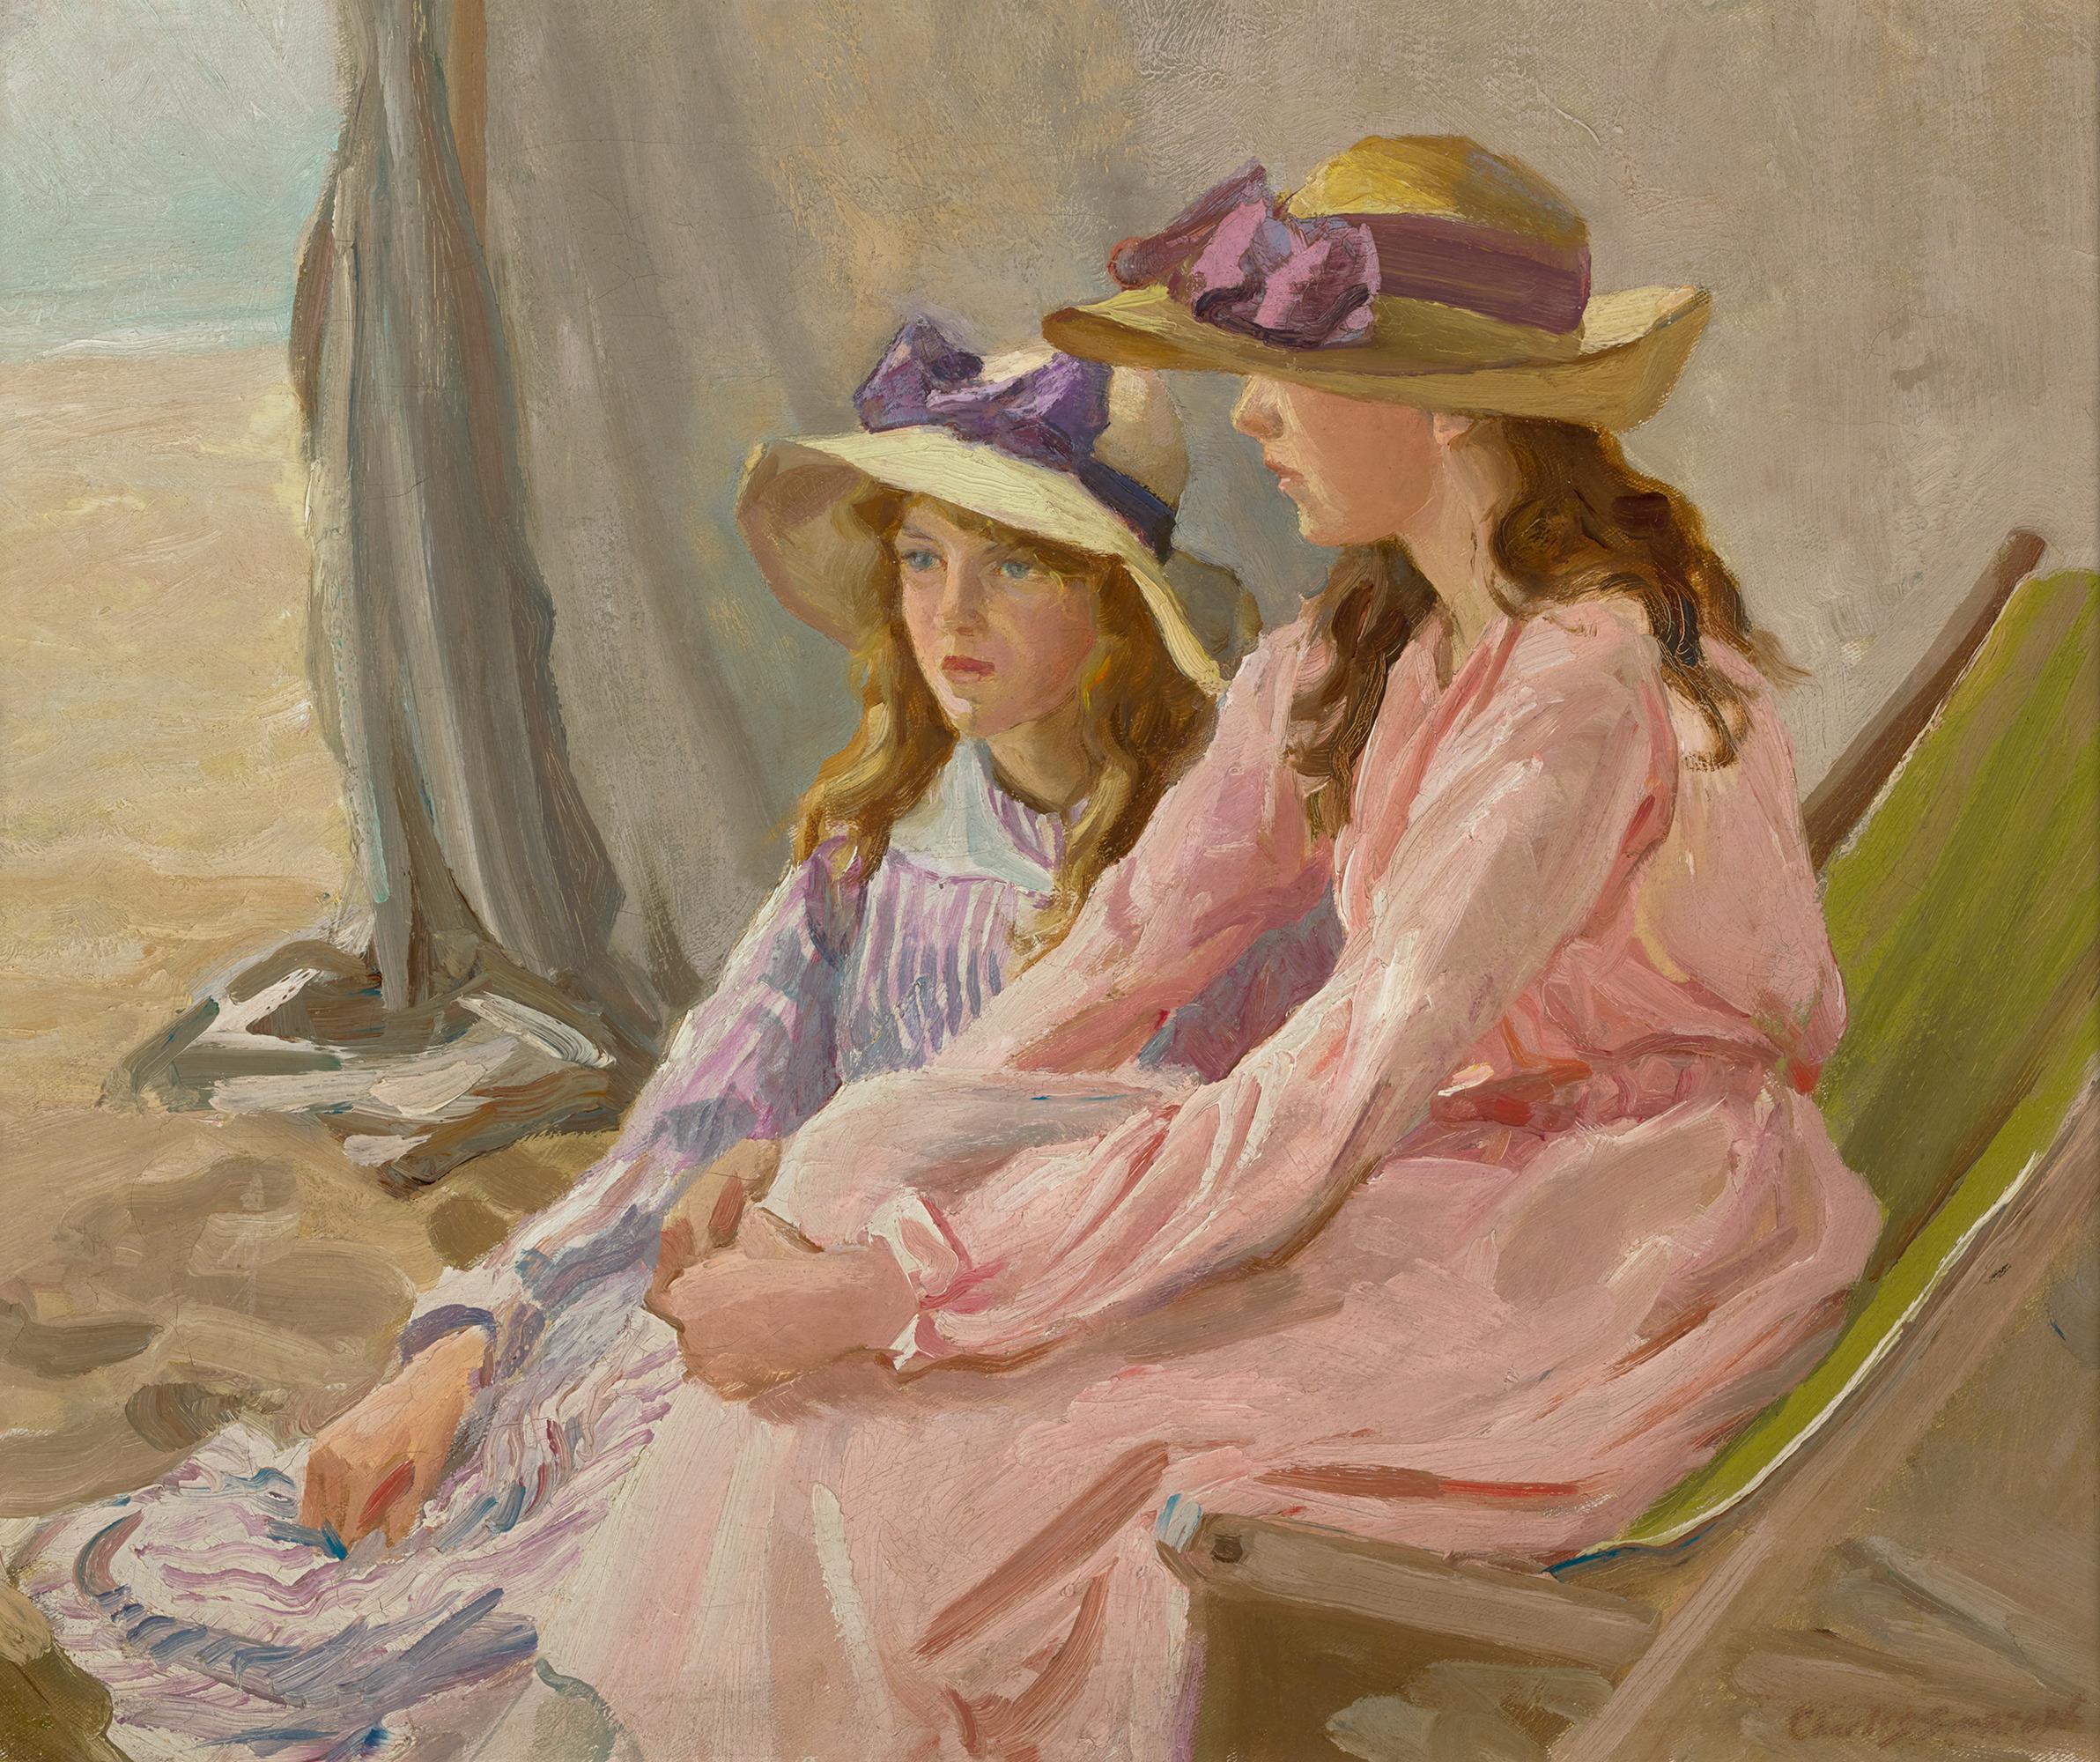 Charles Walter Simpson, RBA, RI, ROI
1885-1971  British

The Tent

Signed "Charles Simpson" (lower right) Oil on canvas

The sunny warmth of a leisurely day on the beach radiates from this composition by acclaimed British genre painter, Charles